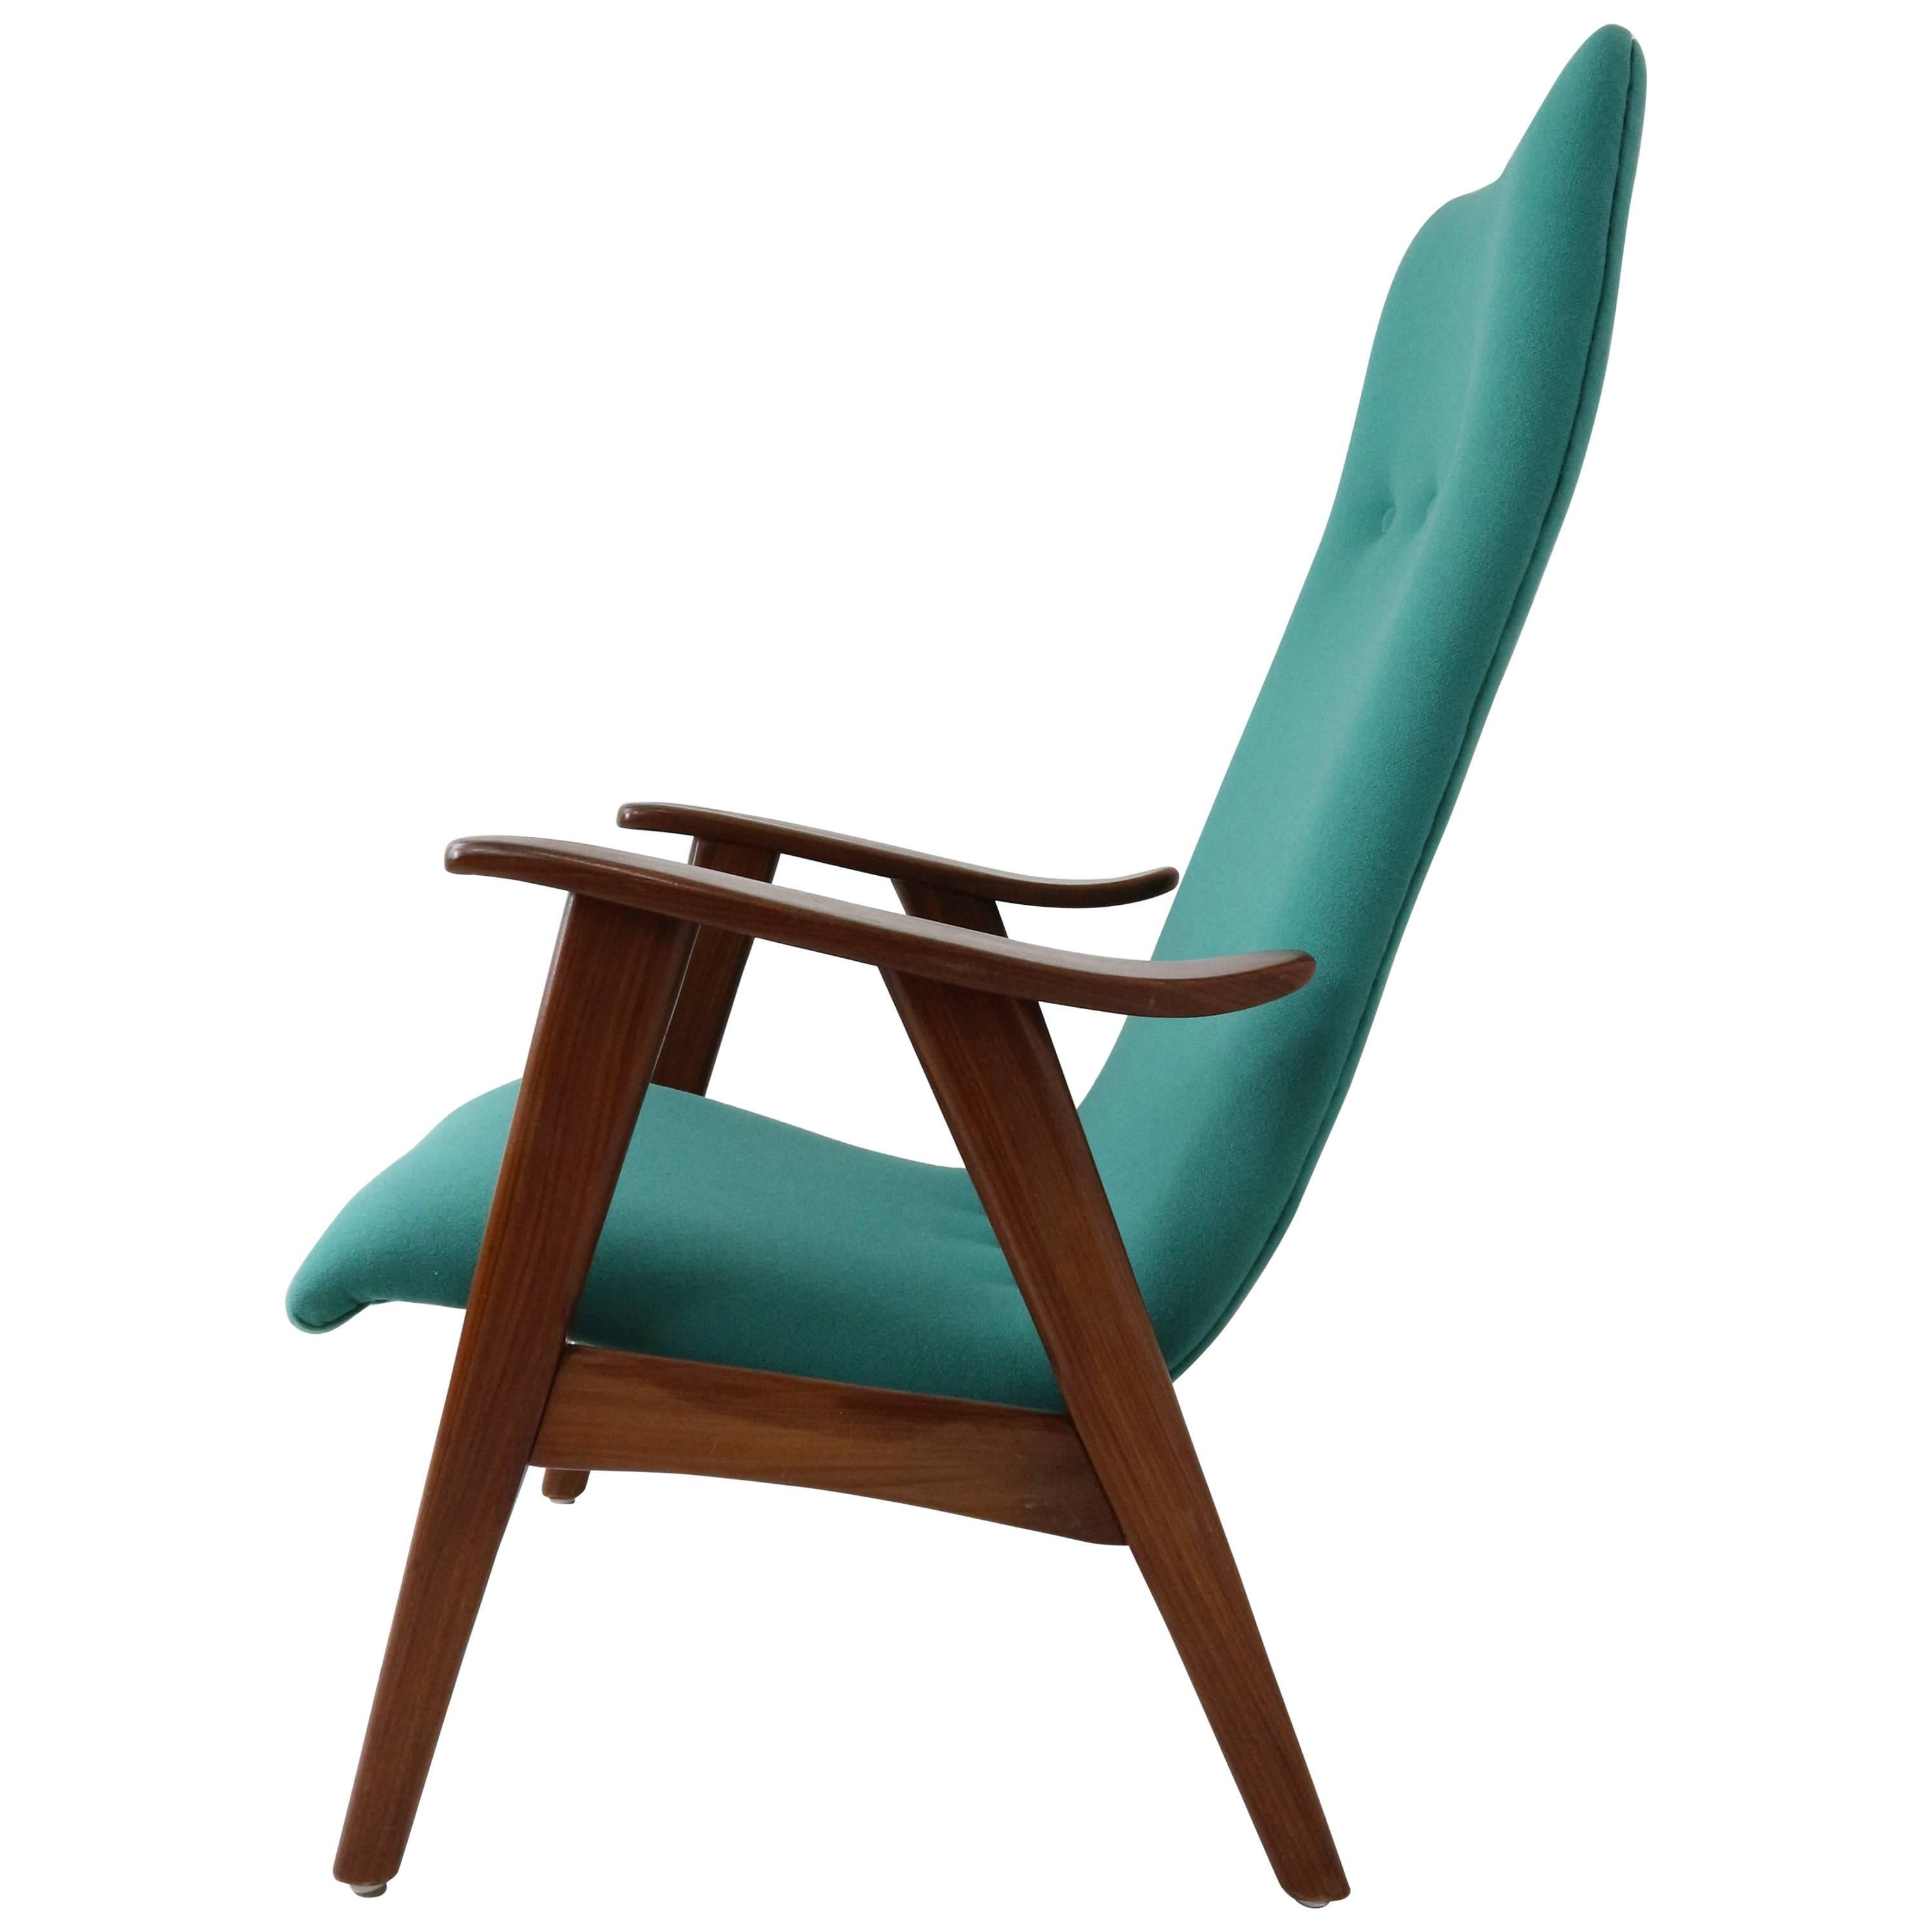 New Upholstered High Back Lounge Chair by Louis Van Teeffelen for Webe